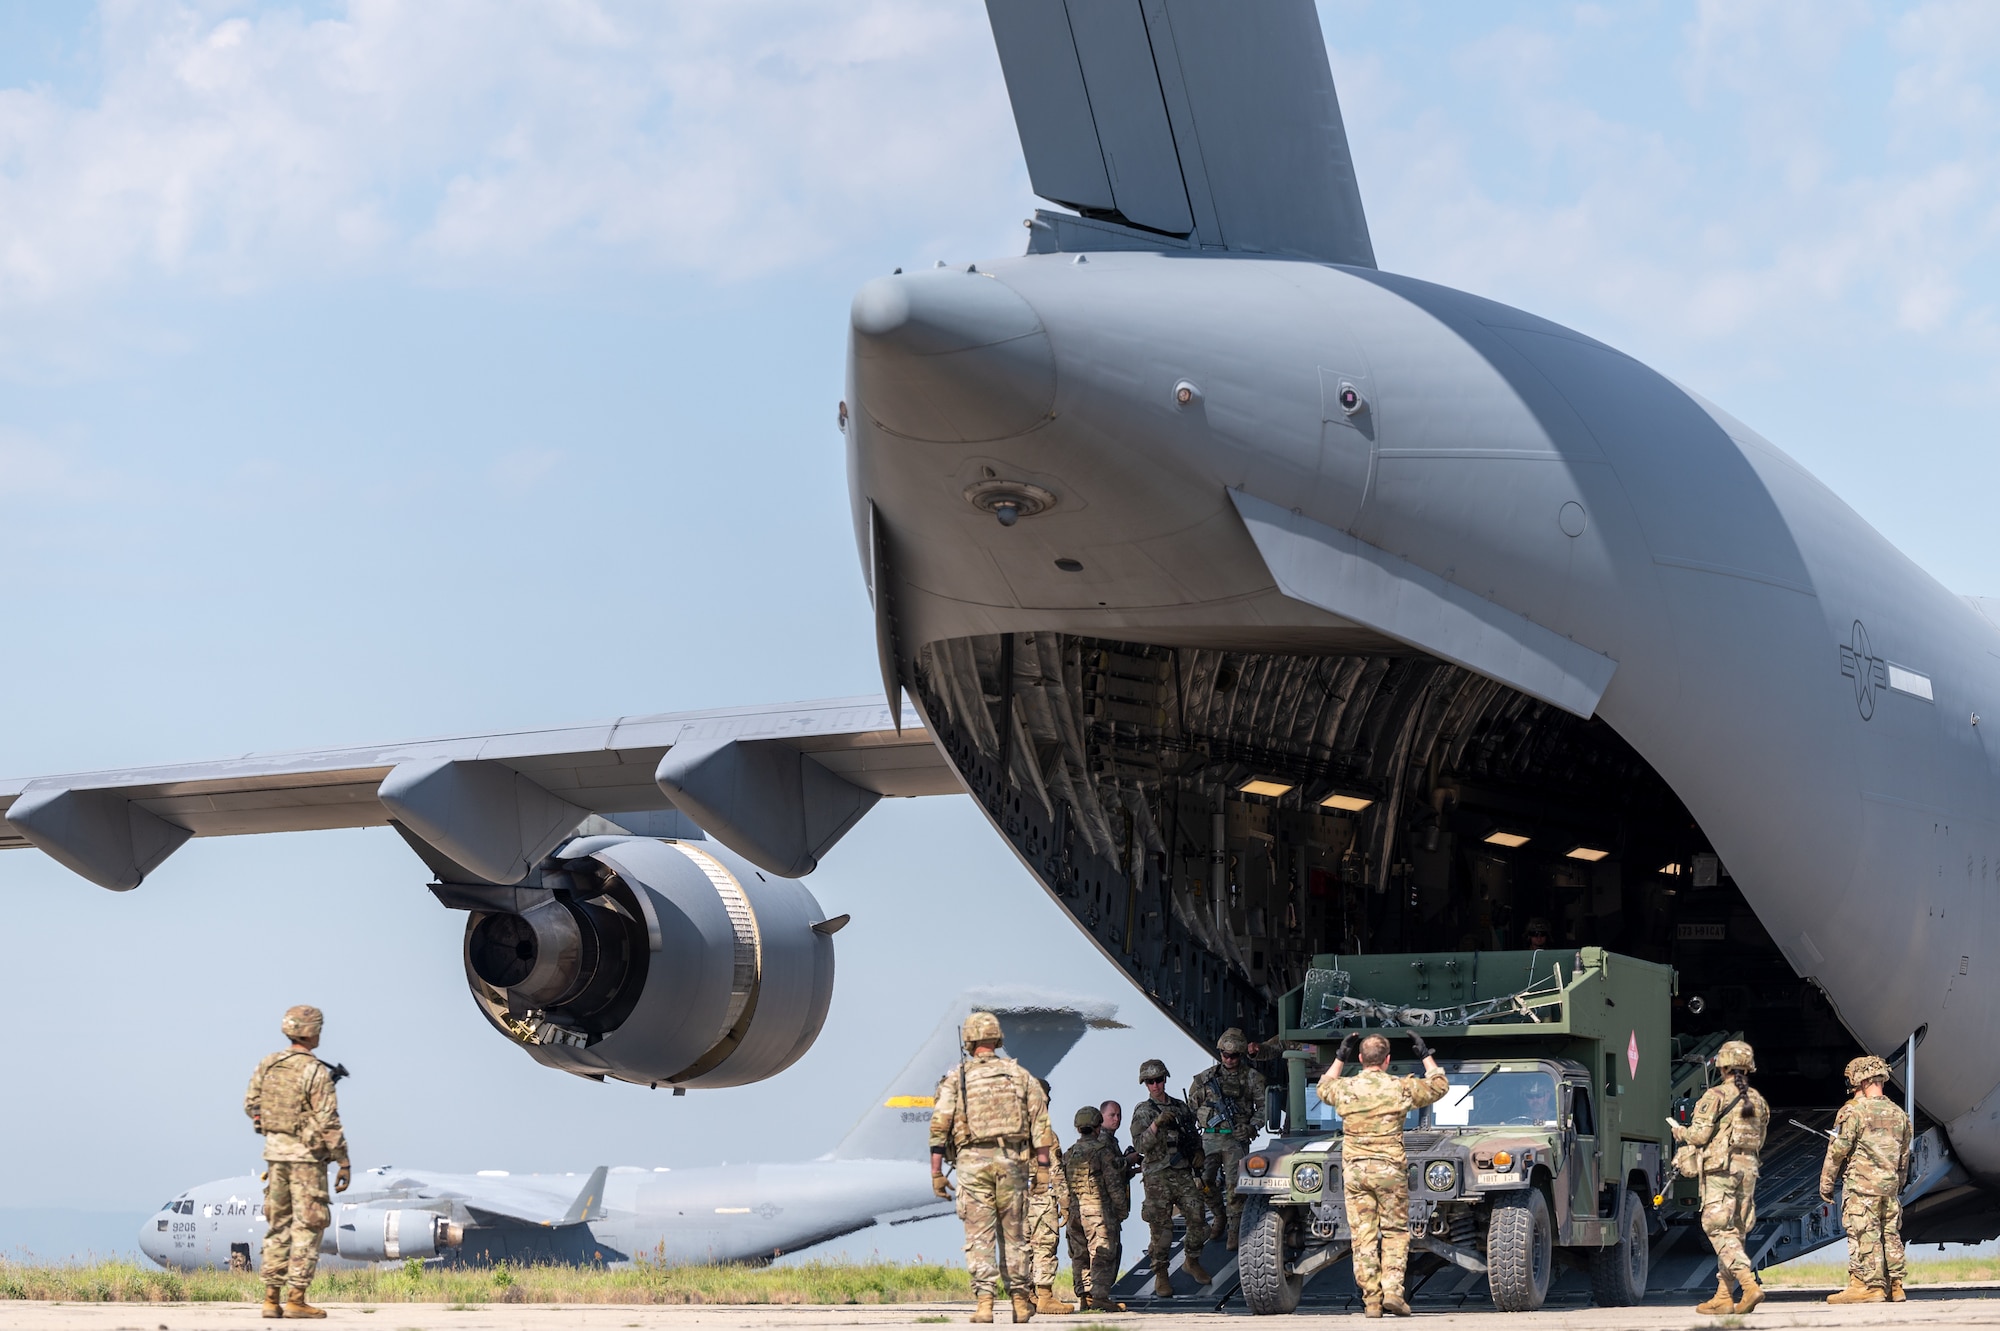 Airmen and Soldiers standing next to an aircraft with its ramp down.